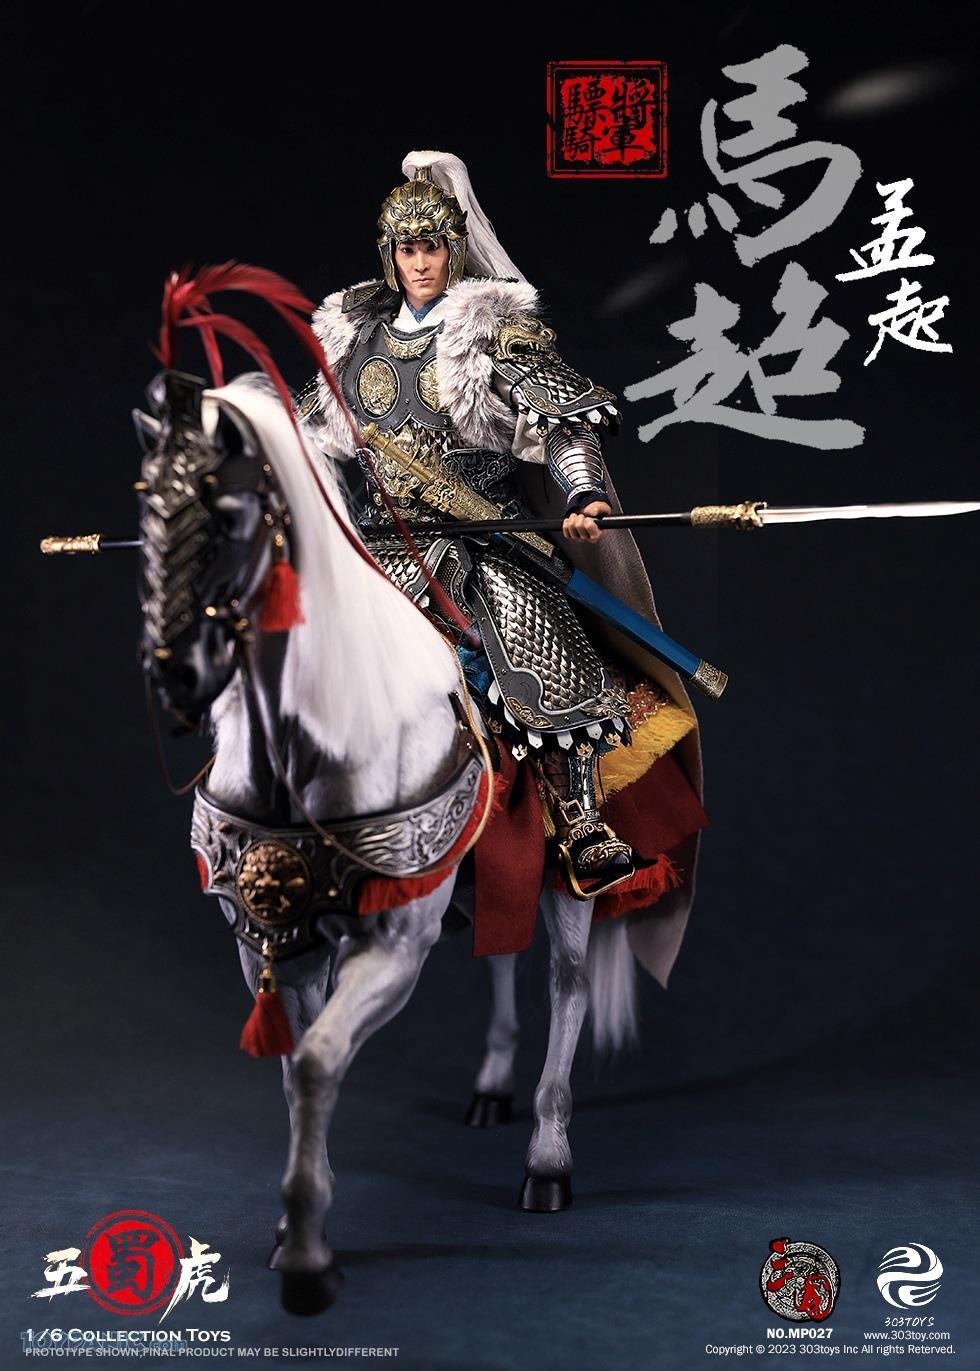 military - NEW PRODUCT: 303TOYS: 1/6 Three Kingdoms Series - Hussar General Ma Chao - Mengqi Pure Copper Standard Edition/Deluxe Edition/Li Shafei War Horse/Helmet 28520237